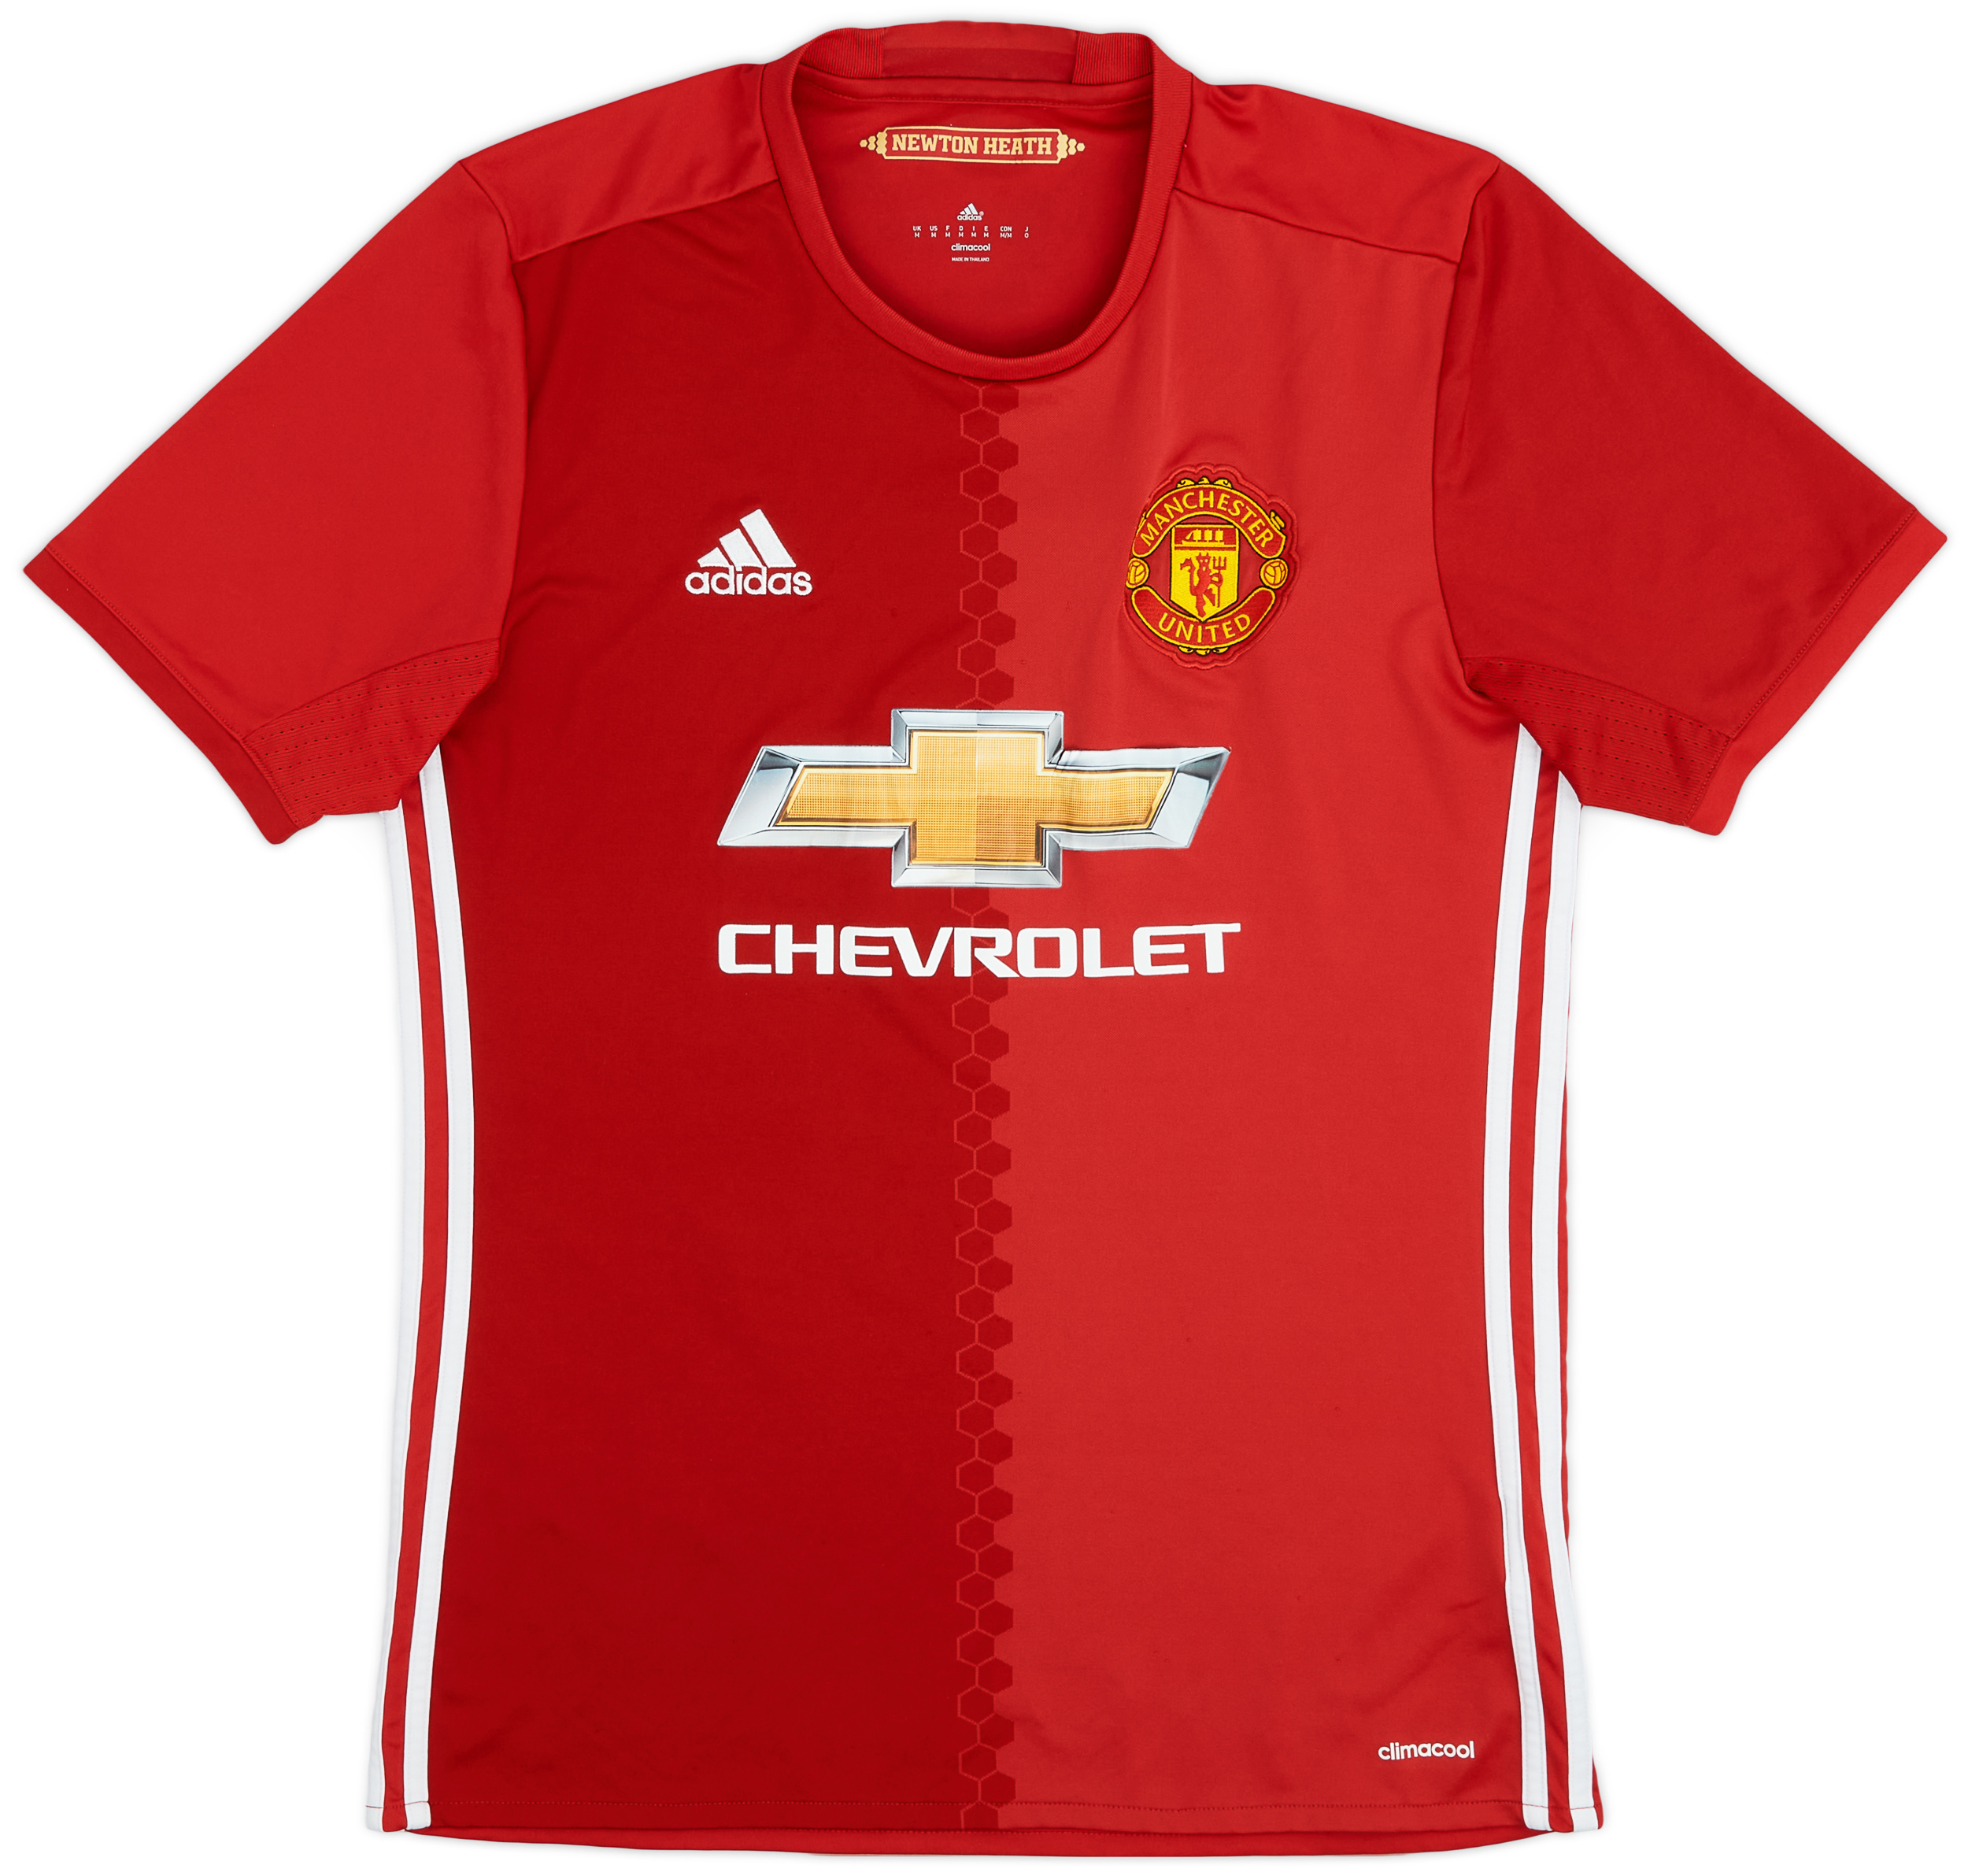 2016-17 Manchester United Home Shirt - 5/10 - (M)